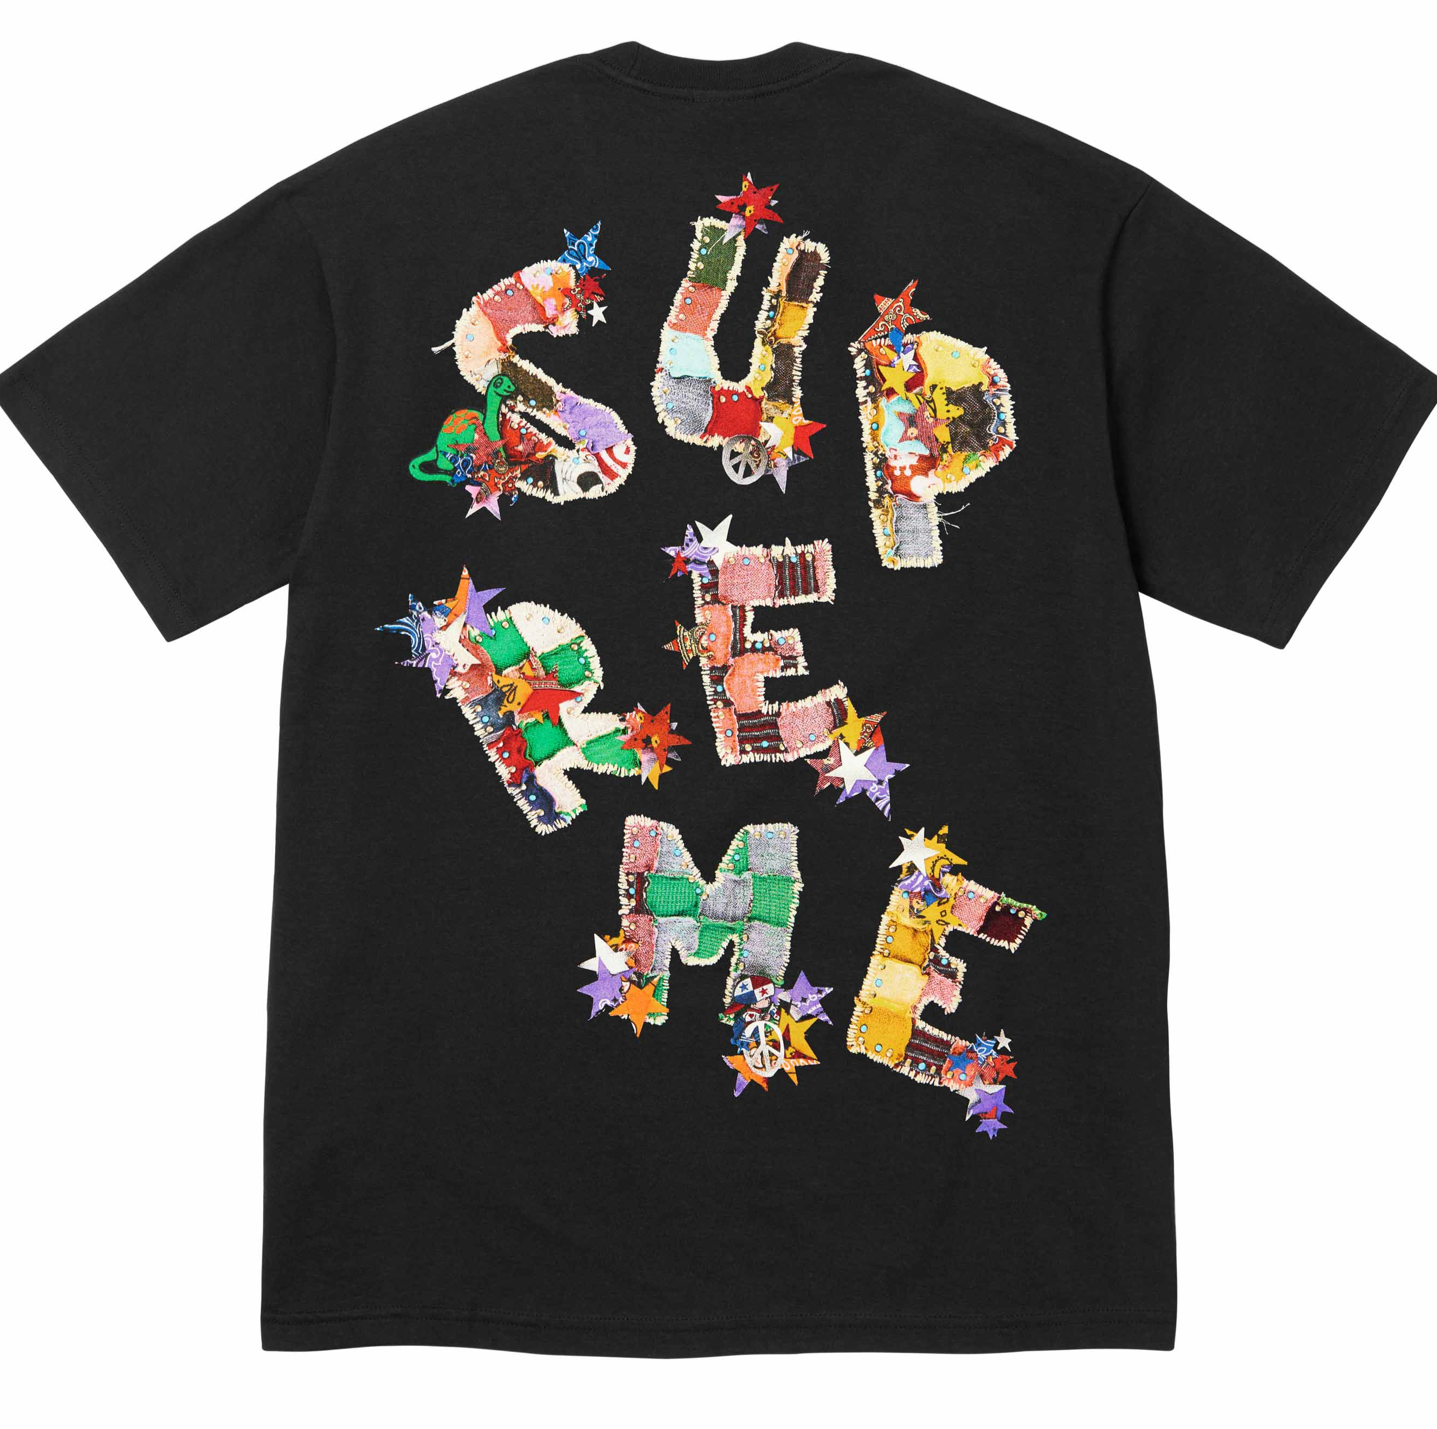 Supreme Patchwork Tee Black by Supreme from £65.00